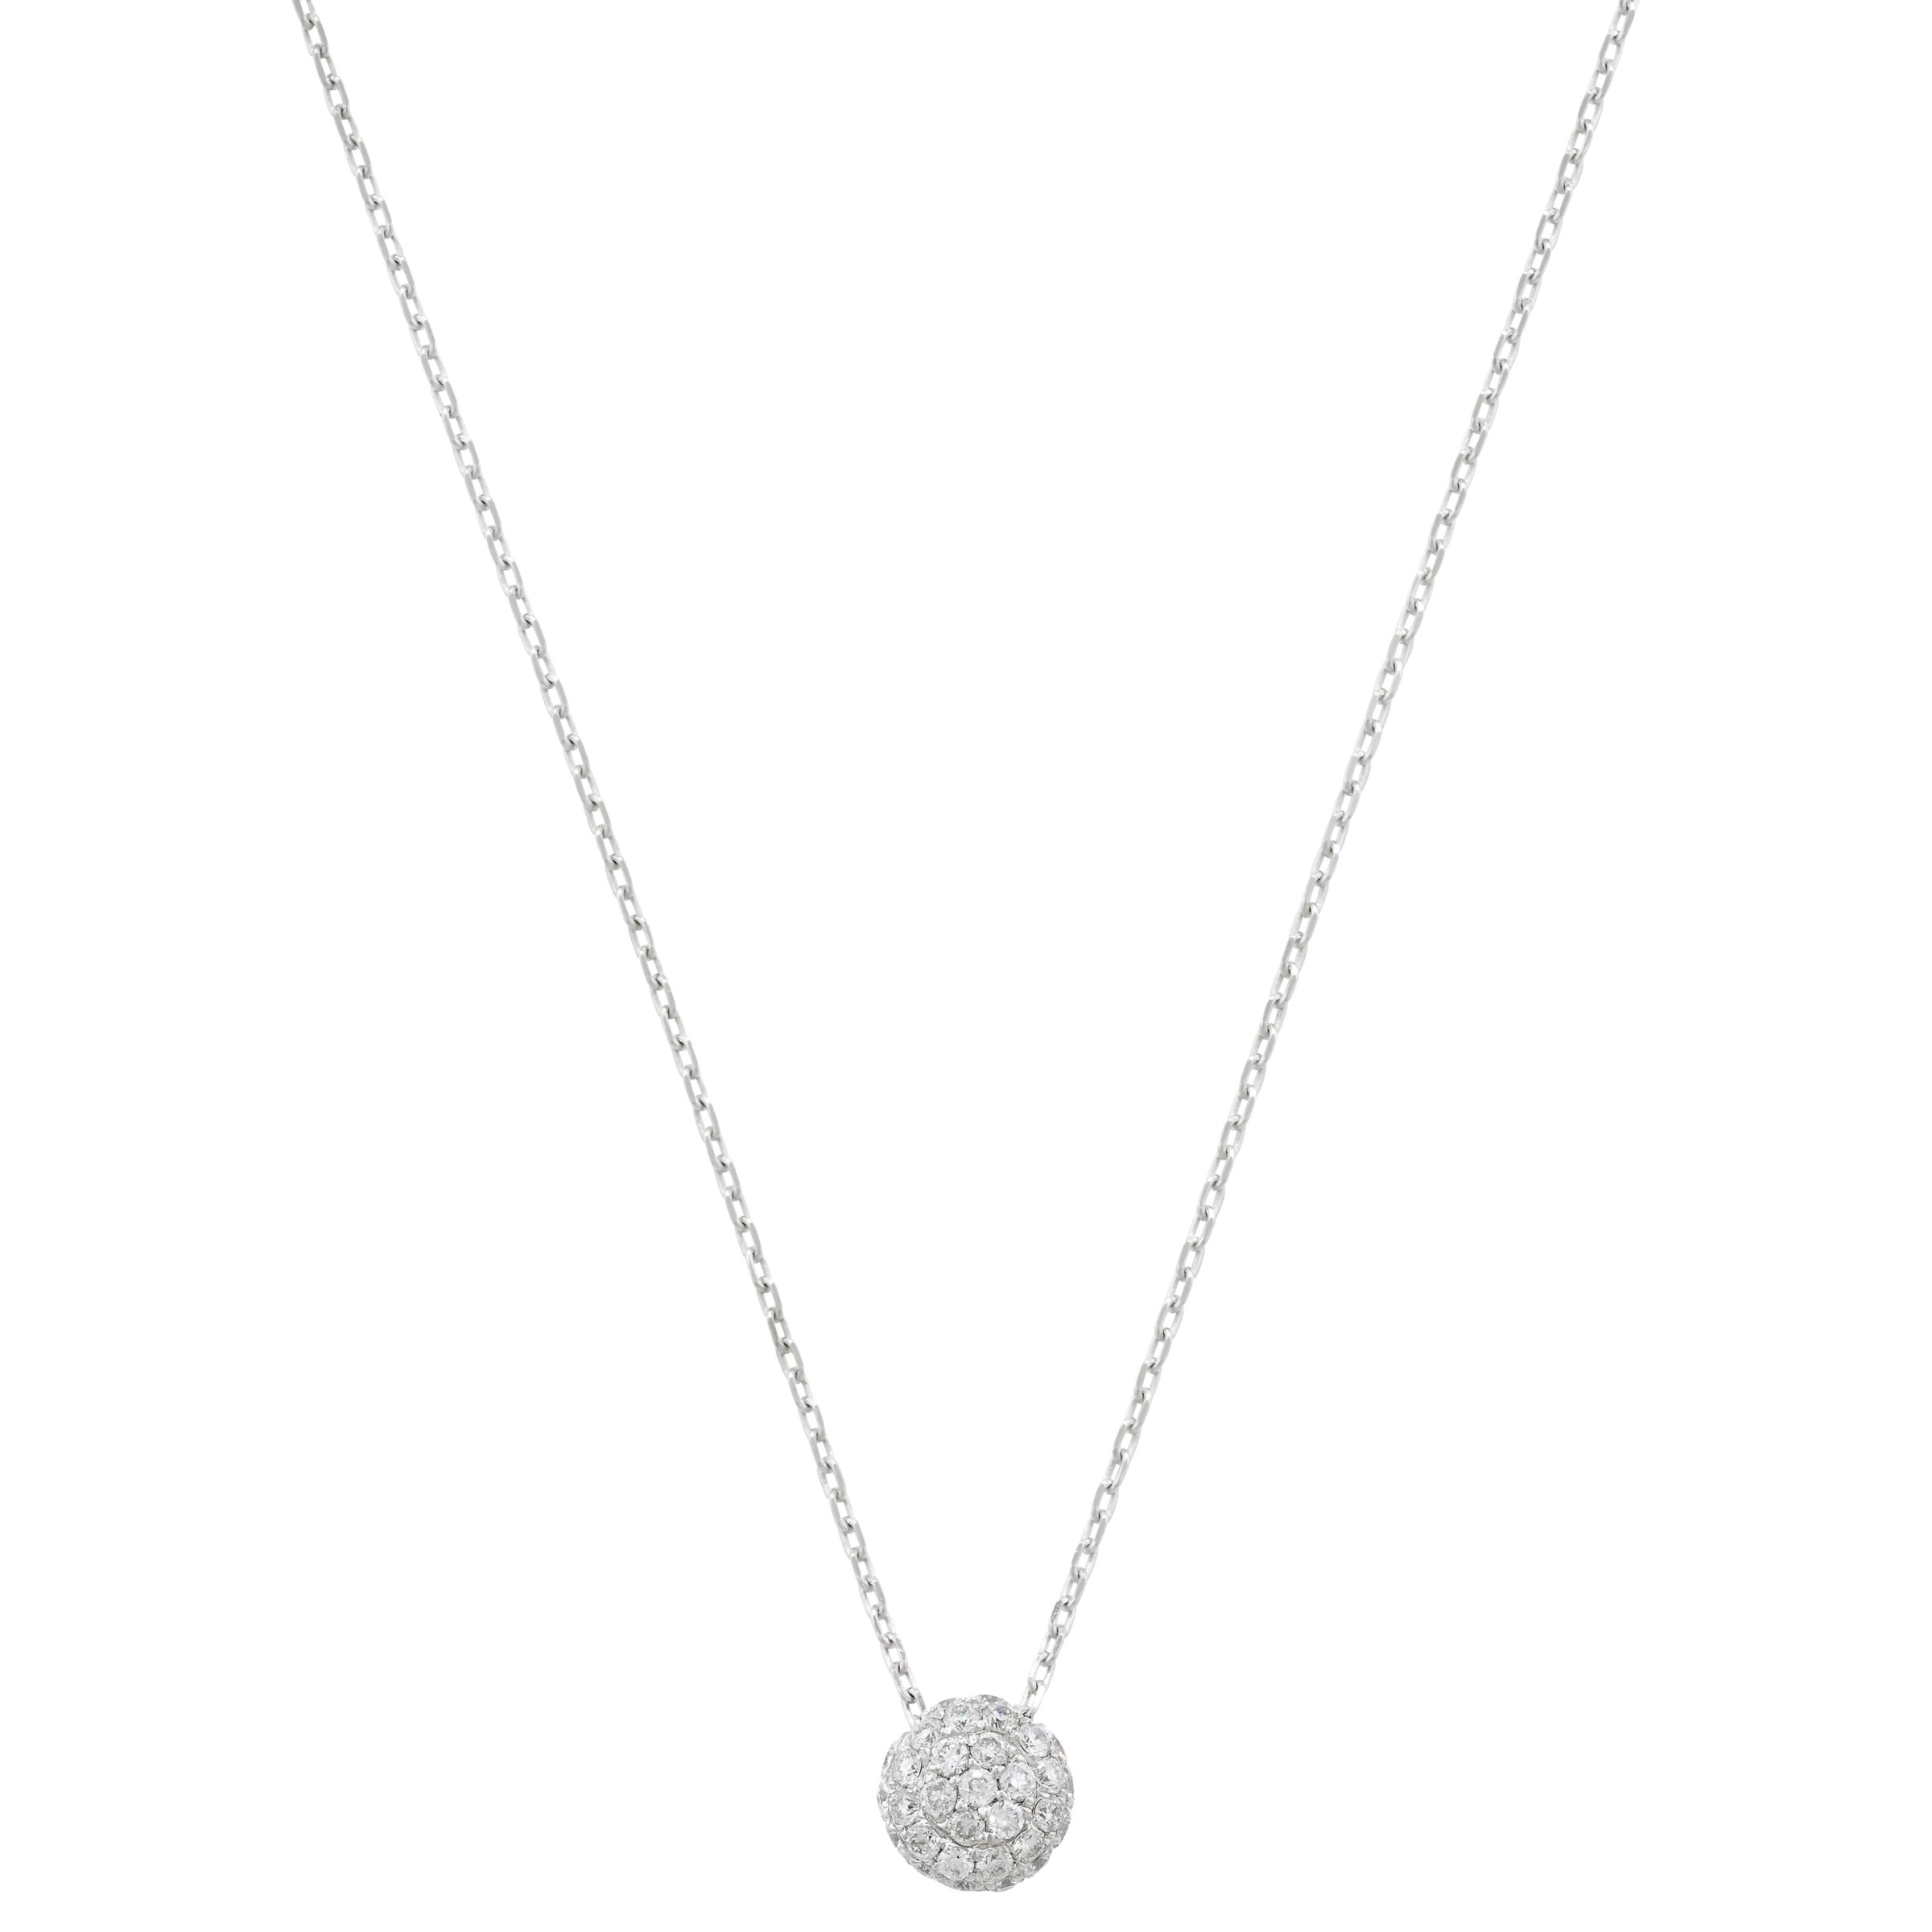 ... Ball Diamond 9ct White Gold Pendant Necklace Online at johnlewis